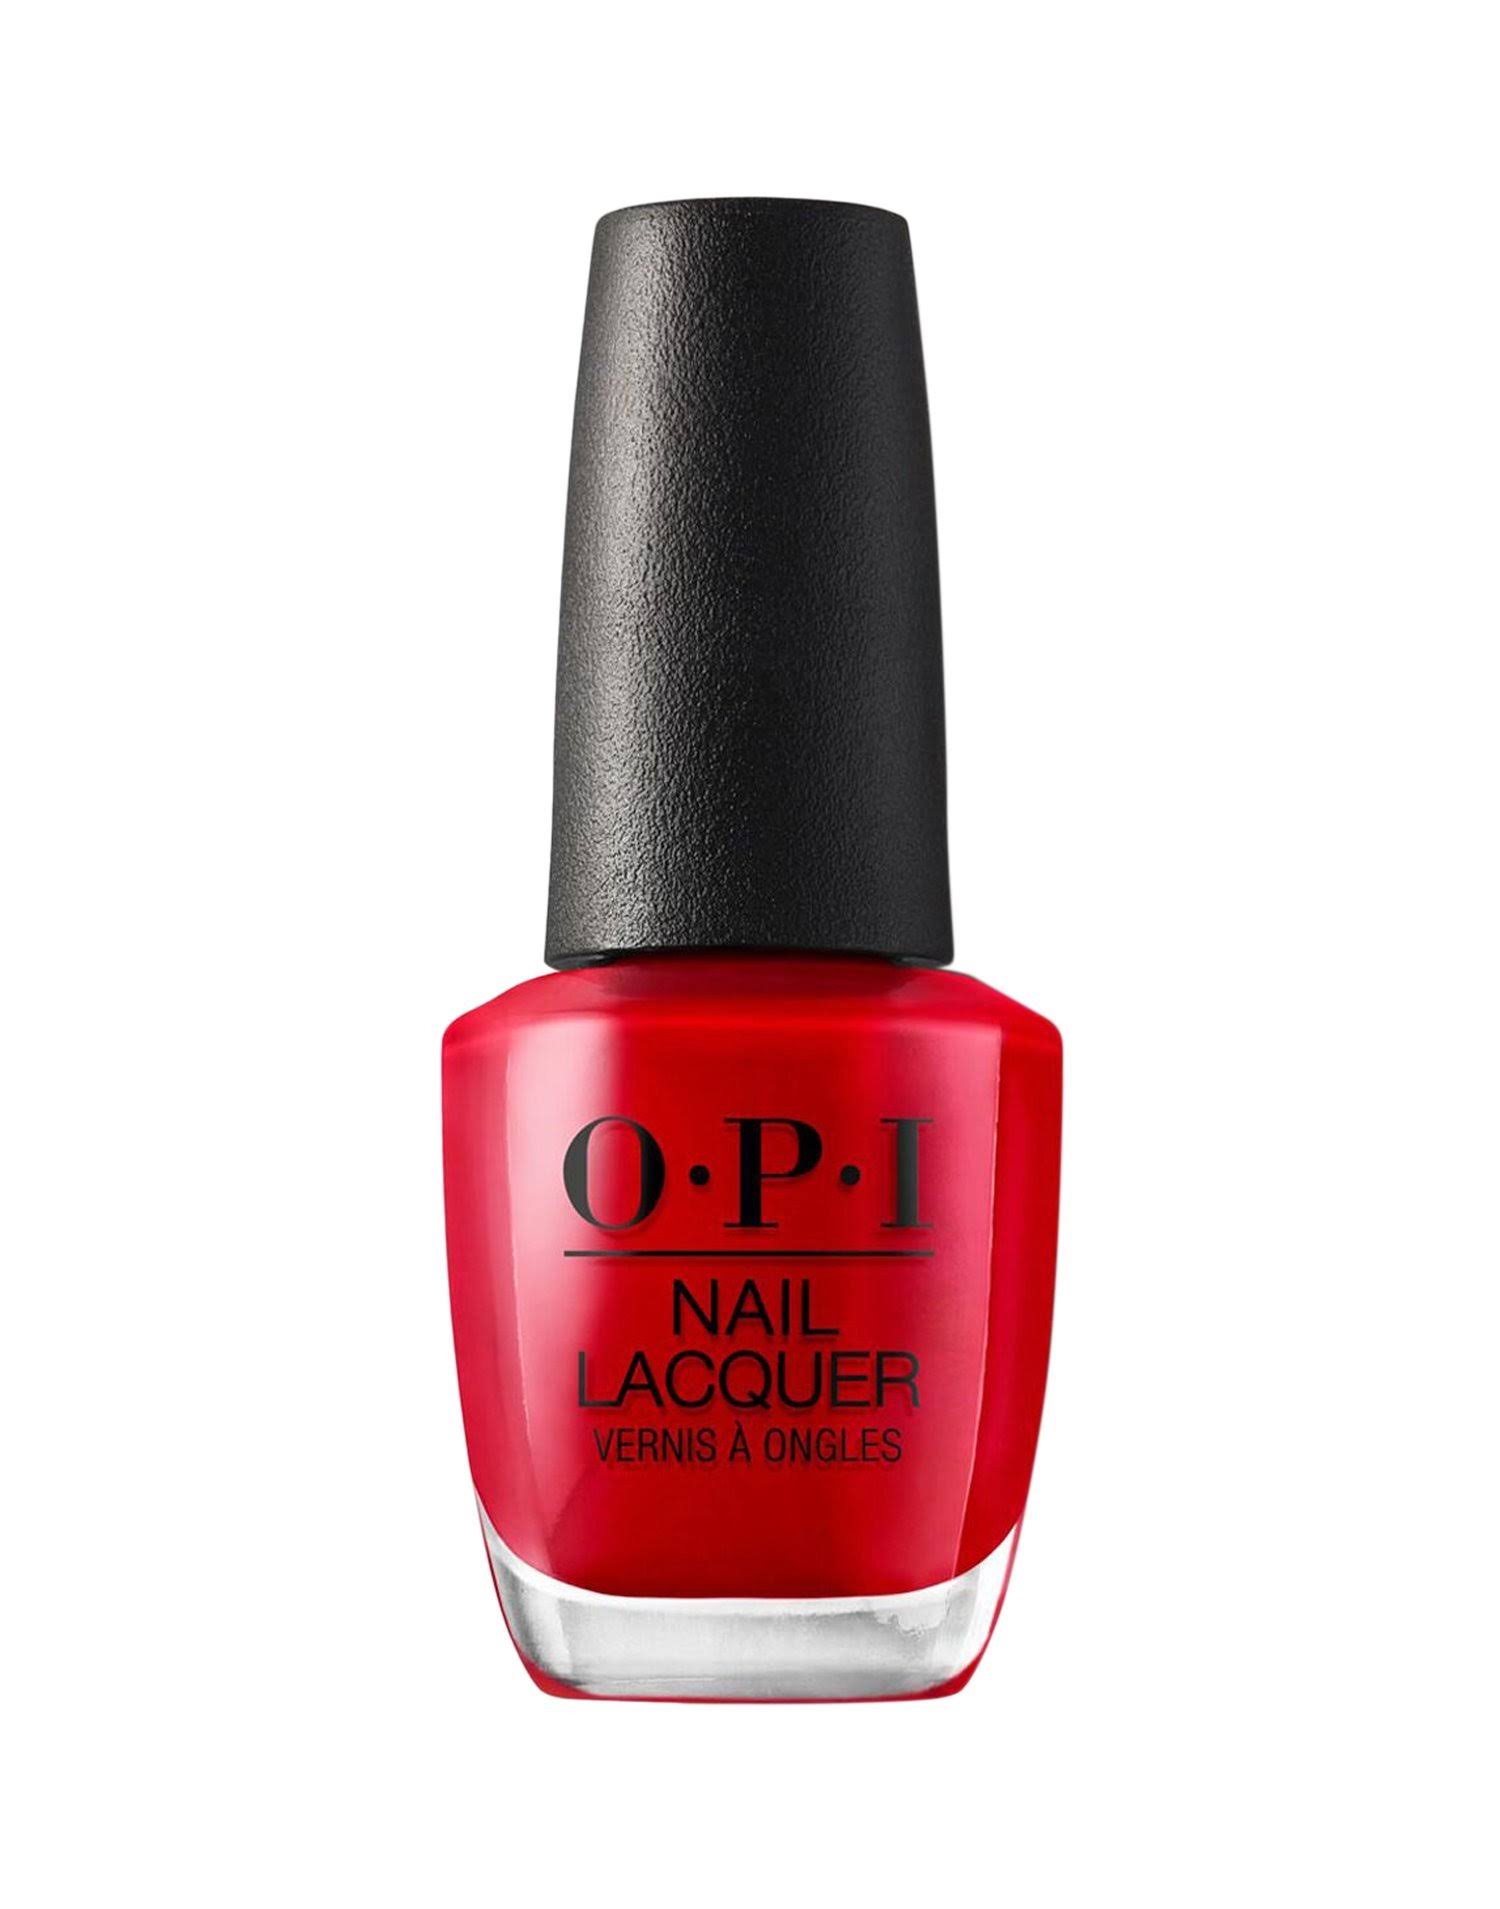 OPI Nail Lacquer - Big Apple Red, 15ml